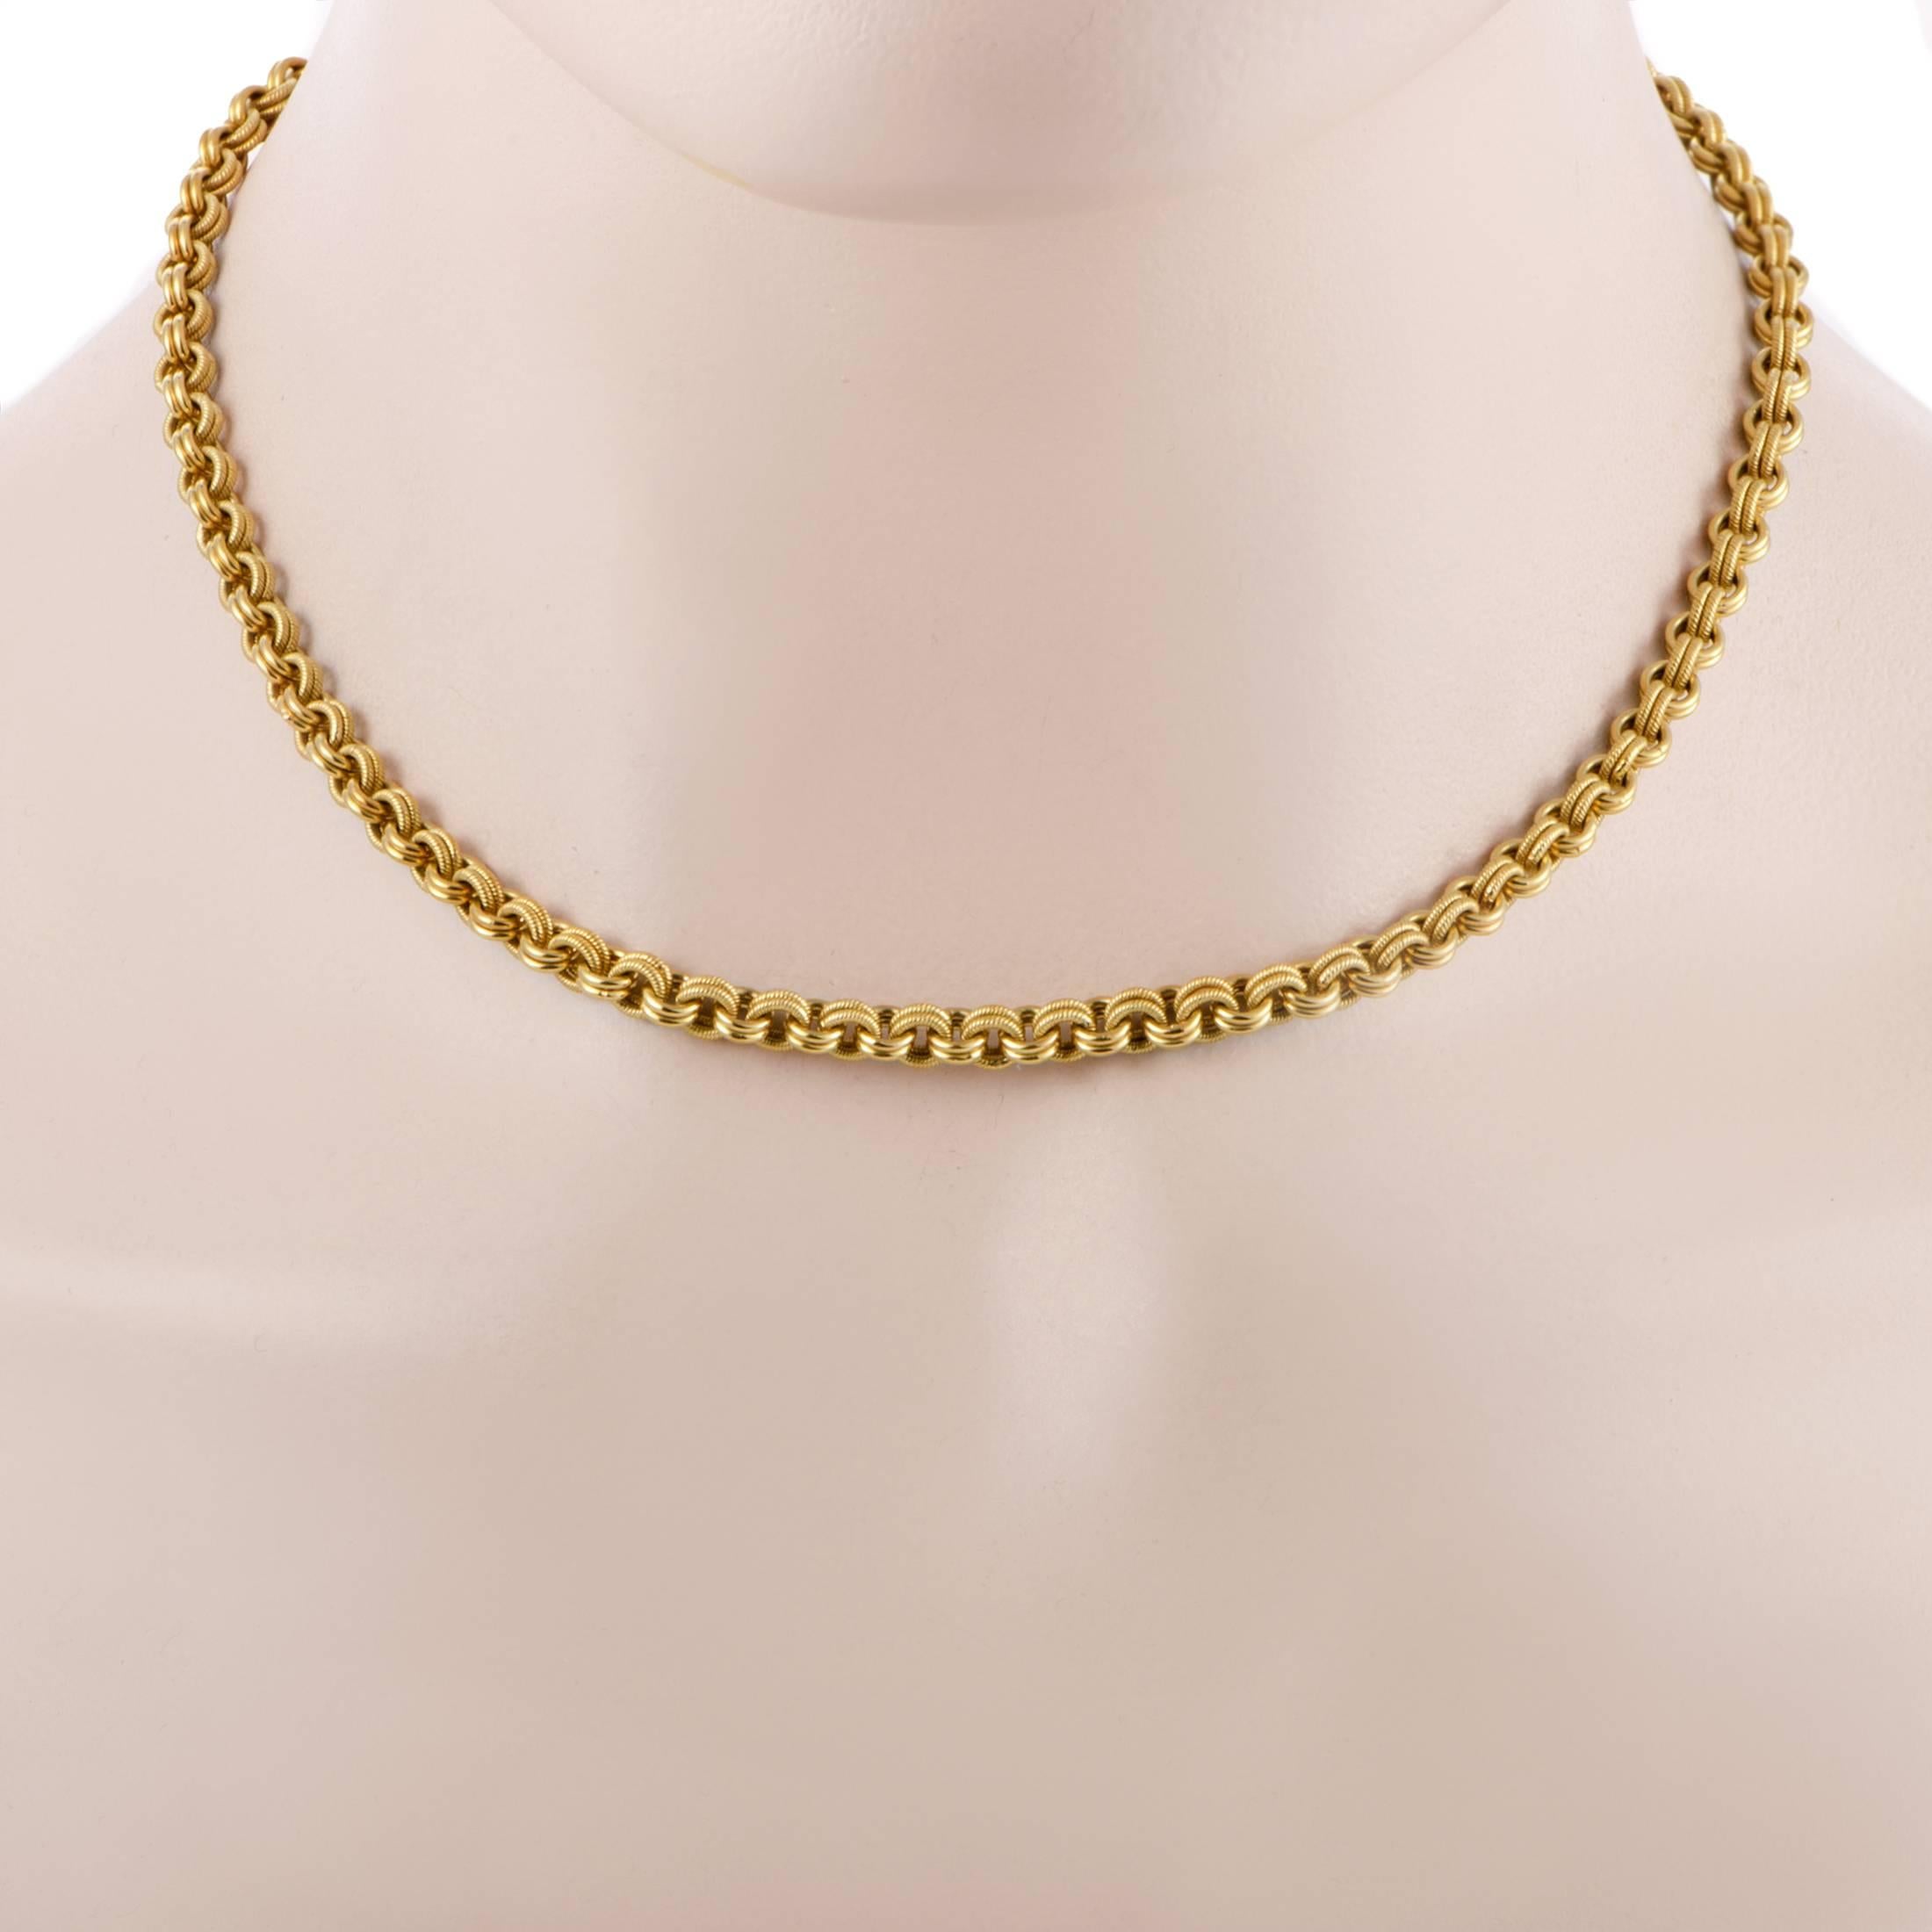 Elegantly simple, gracefully slim and delightfully supple, this stunning necklace from Tiffany & Co. is an item of immense quality and aesthetic appeal, made entirely of radiant 18K yellow gold entwined in an intricate pattern.
Included Items: